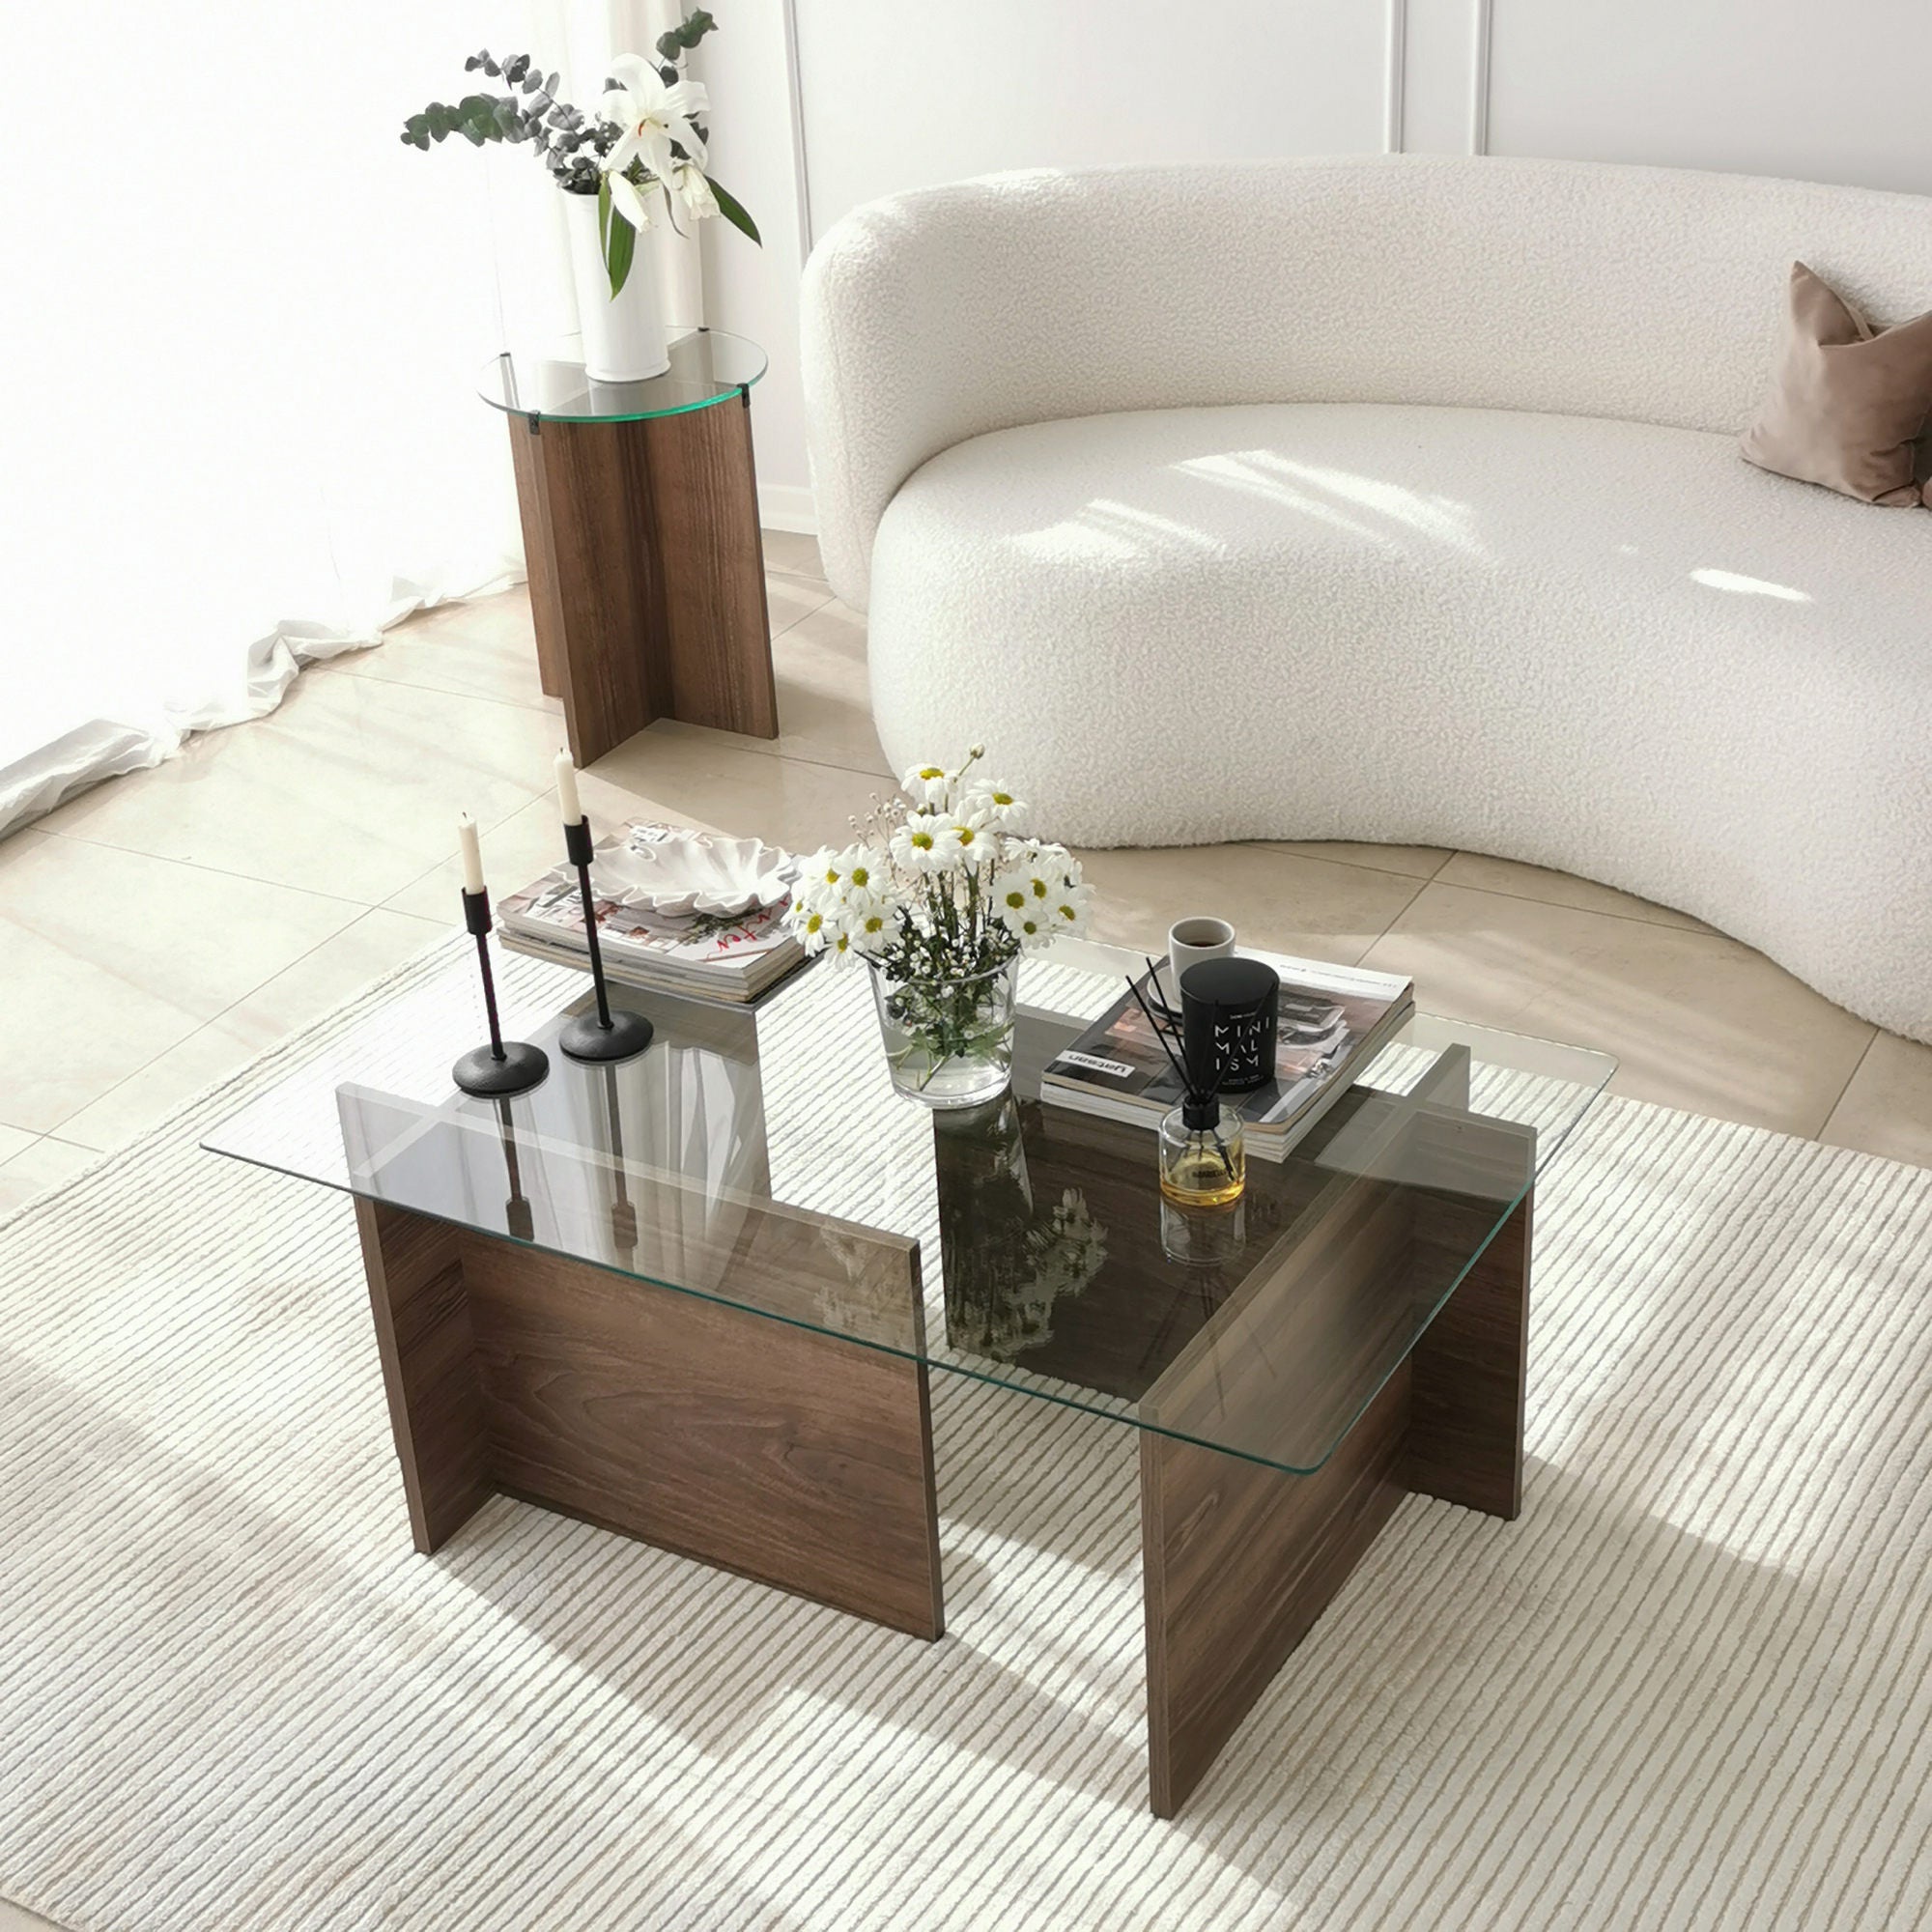 Exquisite Walnut Coffee Table, Wood and Glass, Walnut